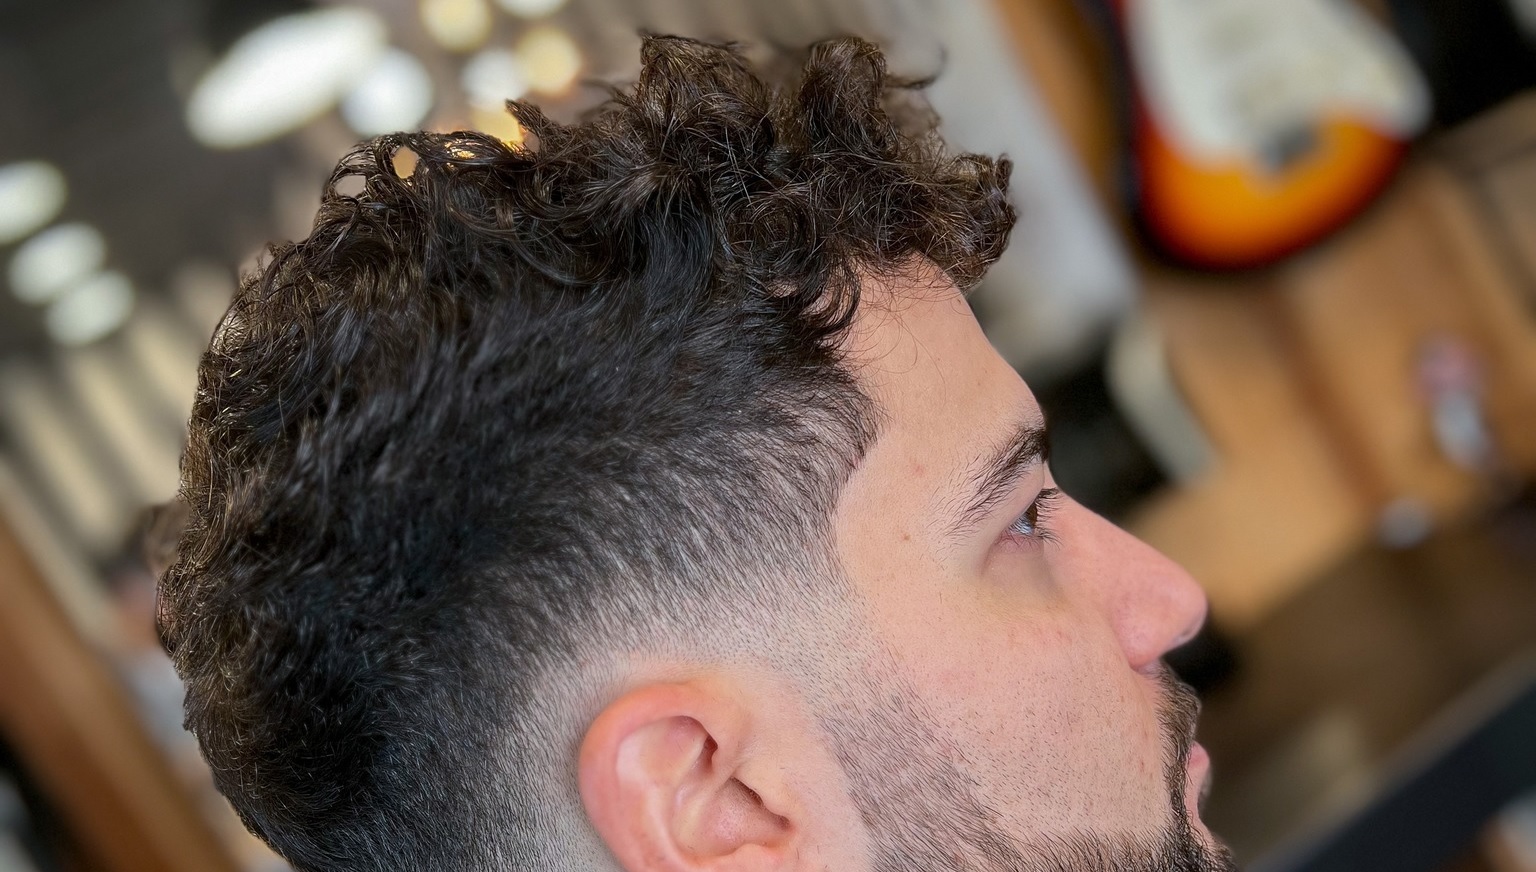 Low Fade Curly Hair